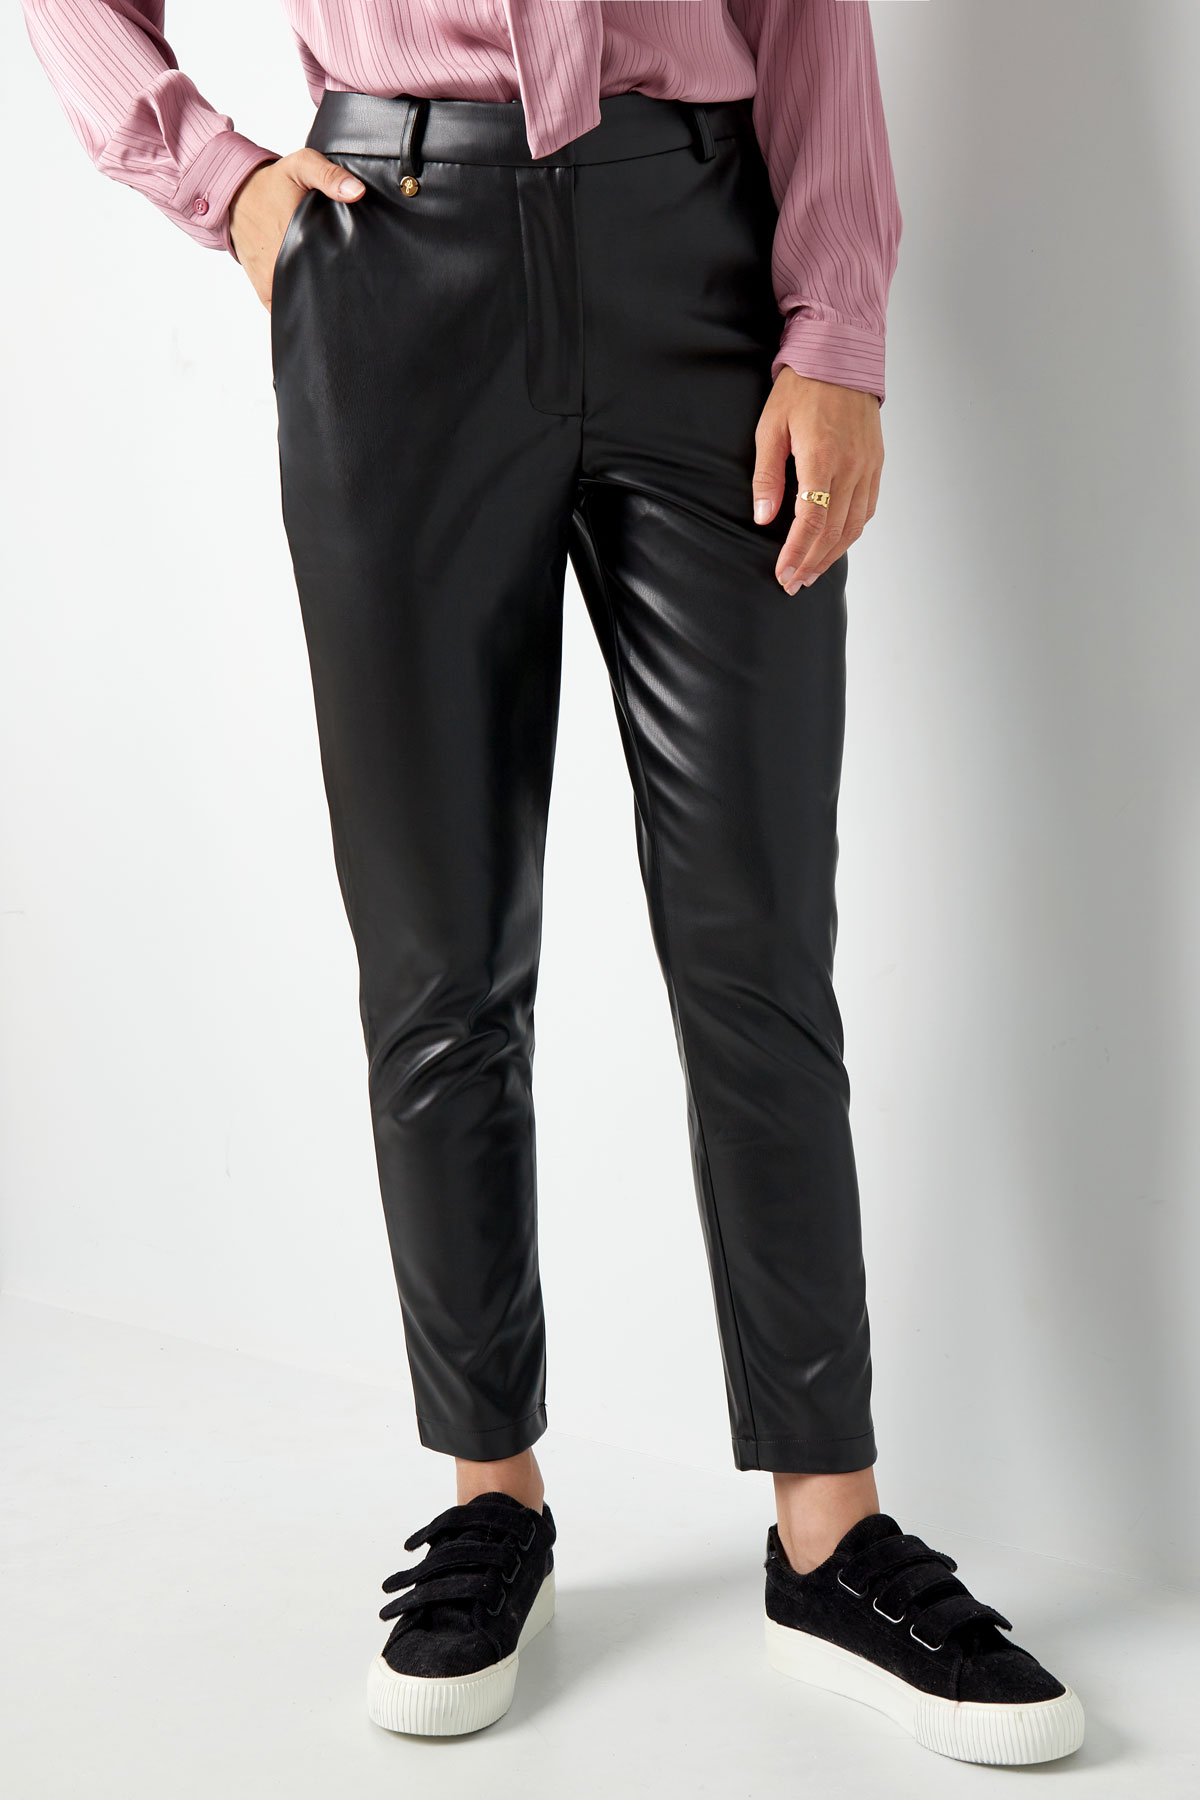 PU leather pants - black Picture2